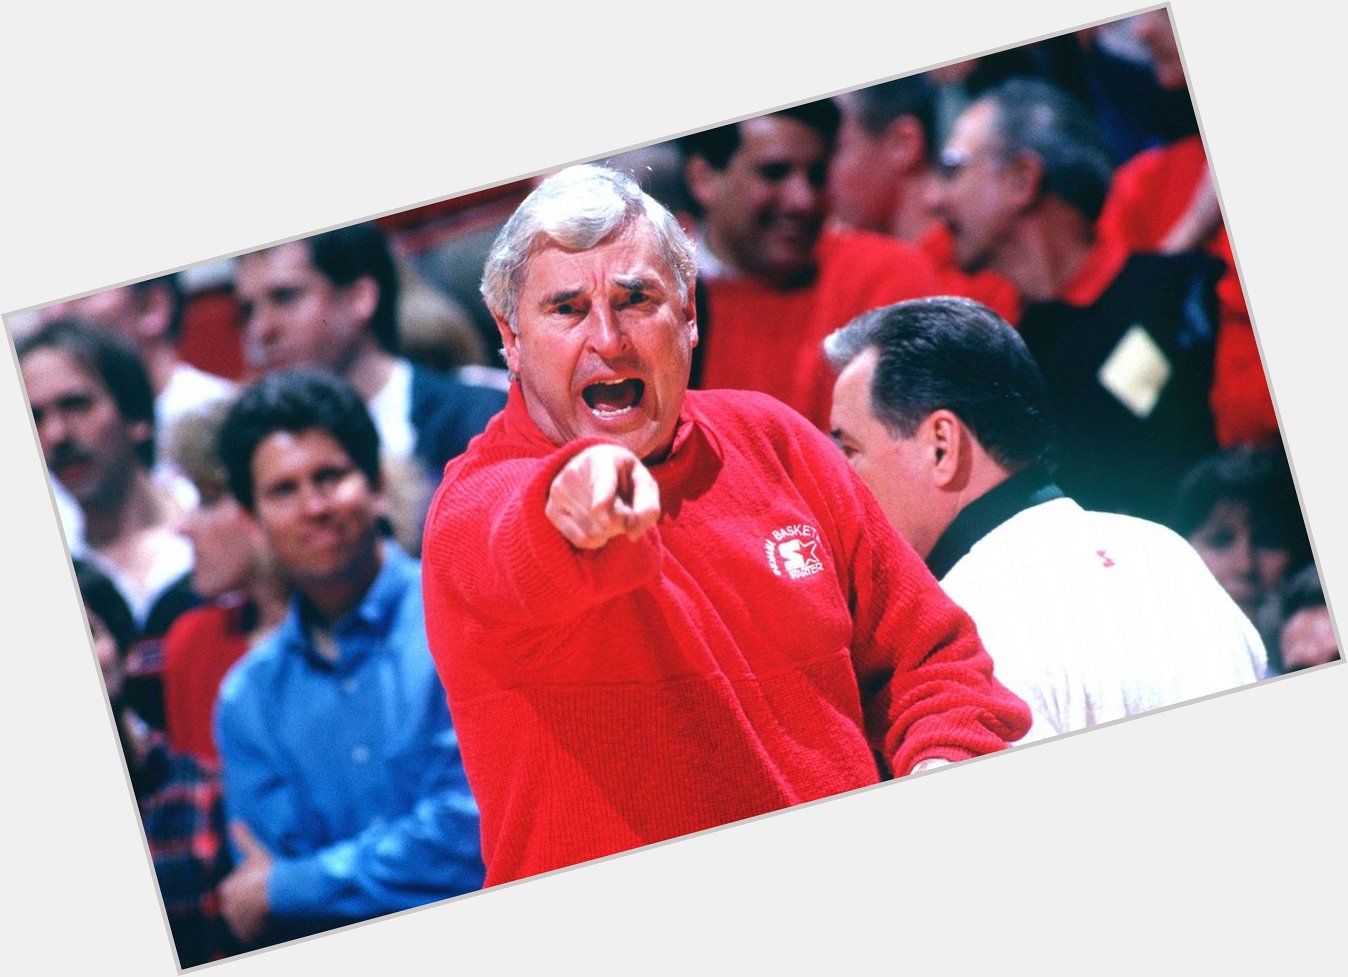 Happy Birthday Gene Hackman! The greatest basketball coach ever in Indiana! 